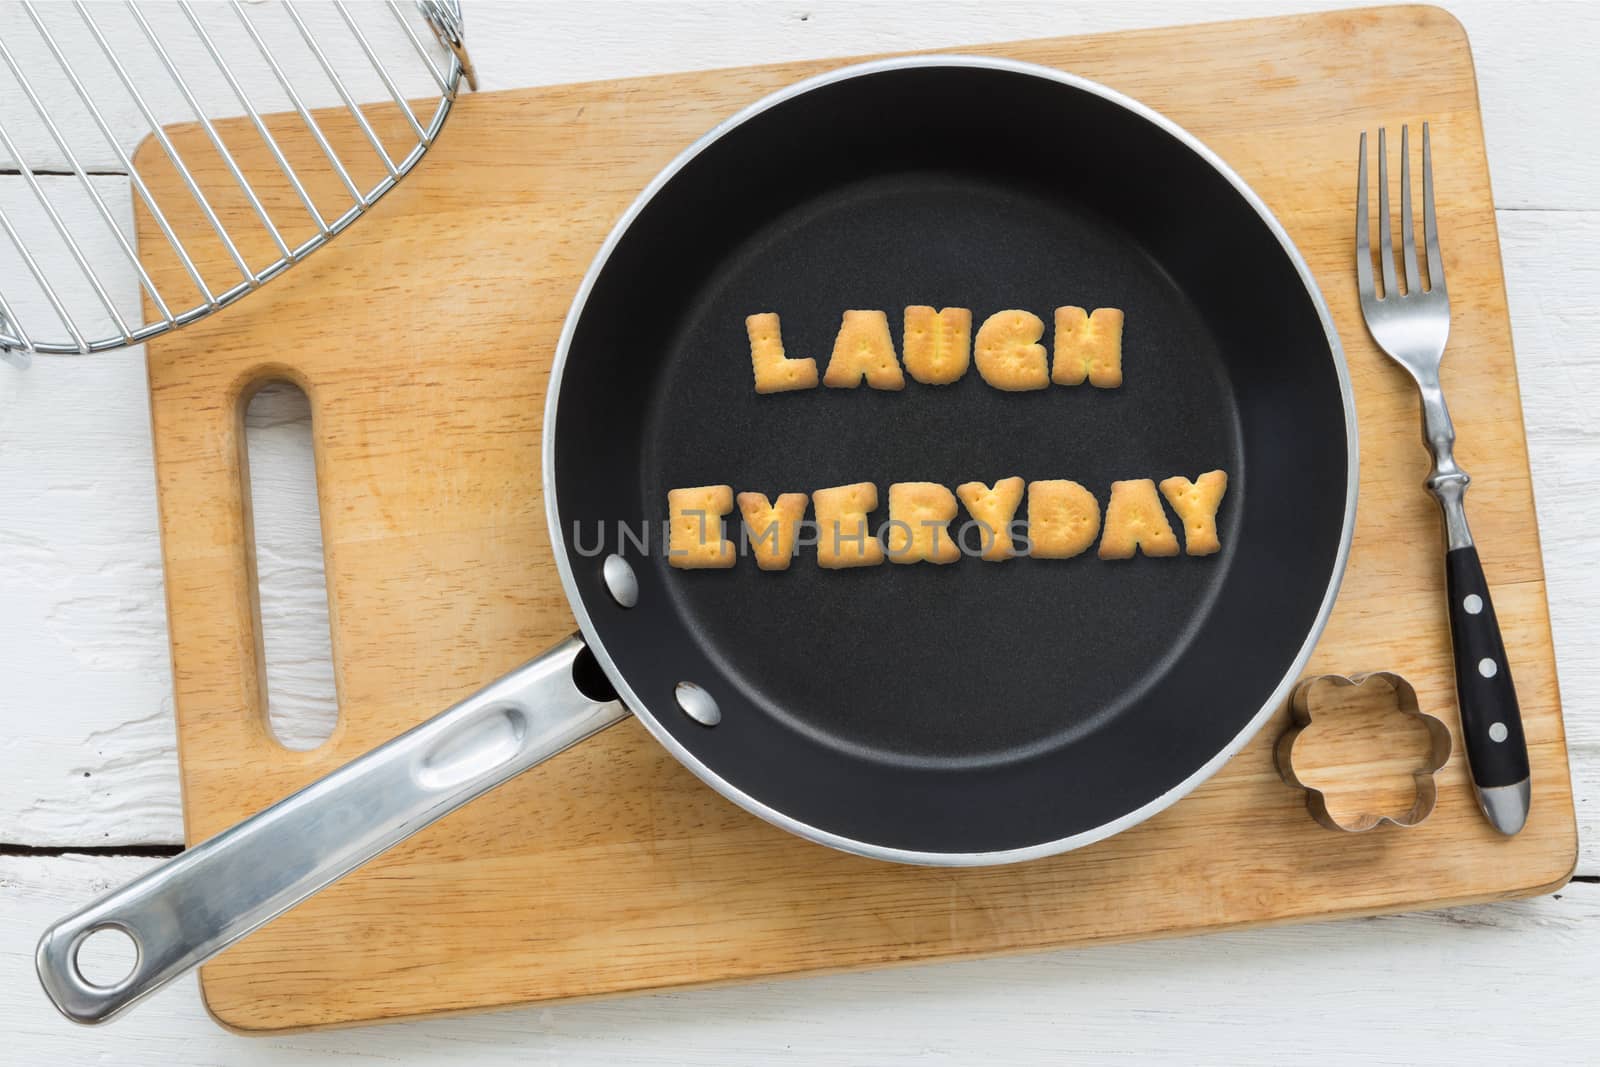 Letter cookies word LAUGH EVERYDAY and kitchen utensils by vinnstock